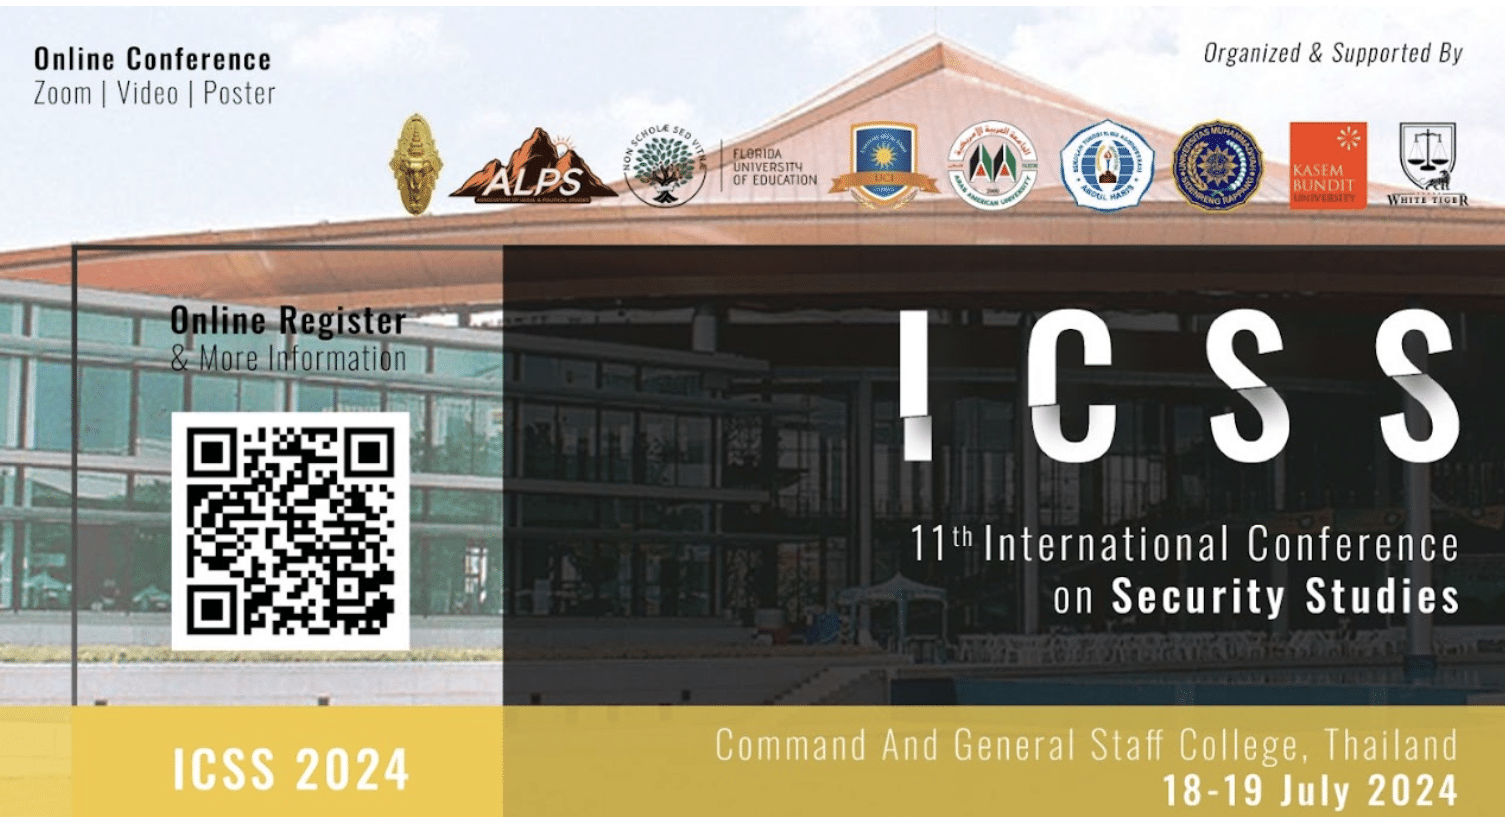 11th International Conference on Security Studies